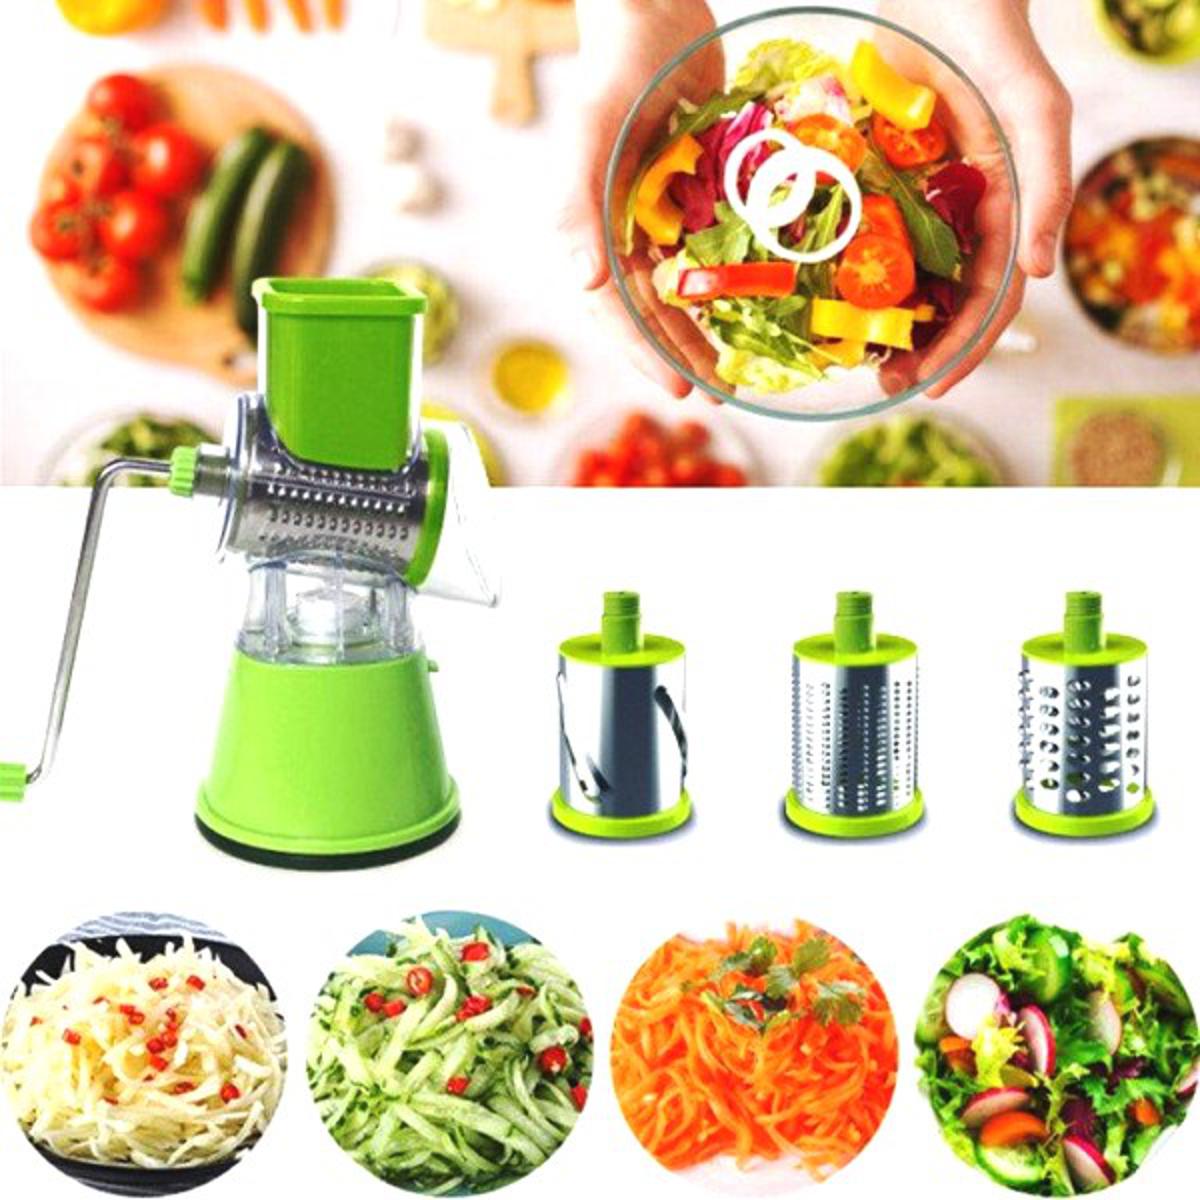 3 in 1 vegetable cutter